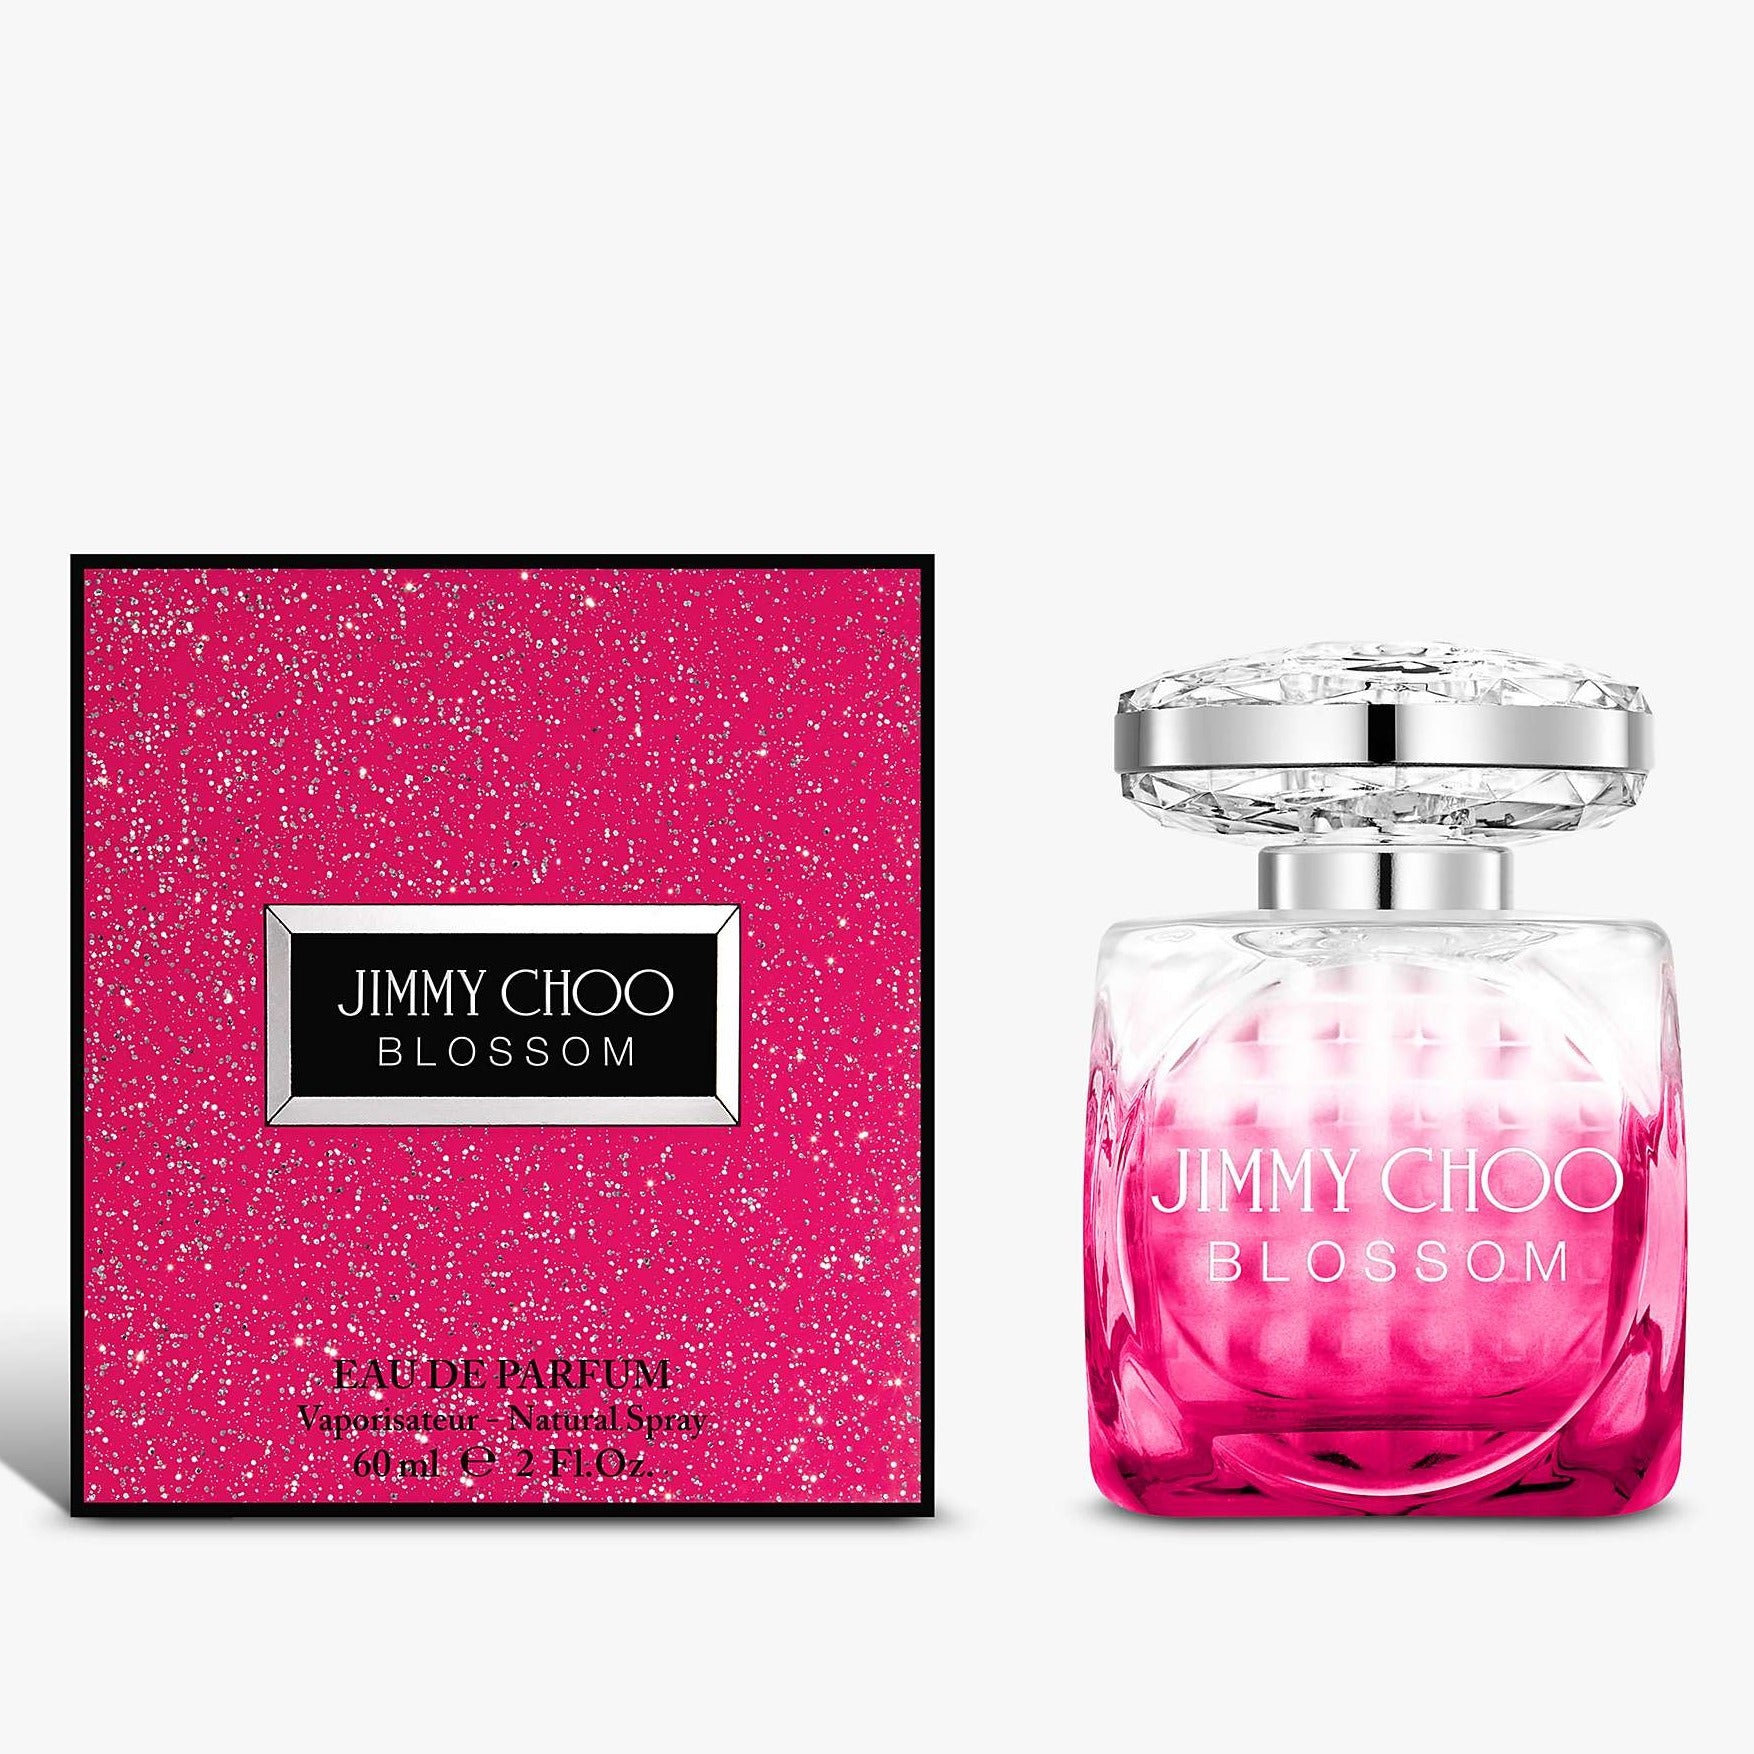 Jimmy Choo Blossom Eau de Parfum For Her 60ml Spray A floral, fruity fragrance for women.  TOP NOTES: Raspberry, Red Berries, Citruses  HEART NOTES: Sweet Pea, Rose  BASE NOTES: White musk, Sandalwood